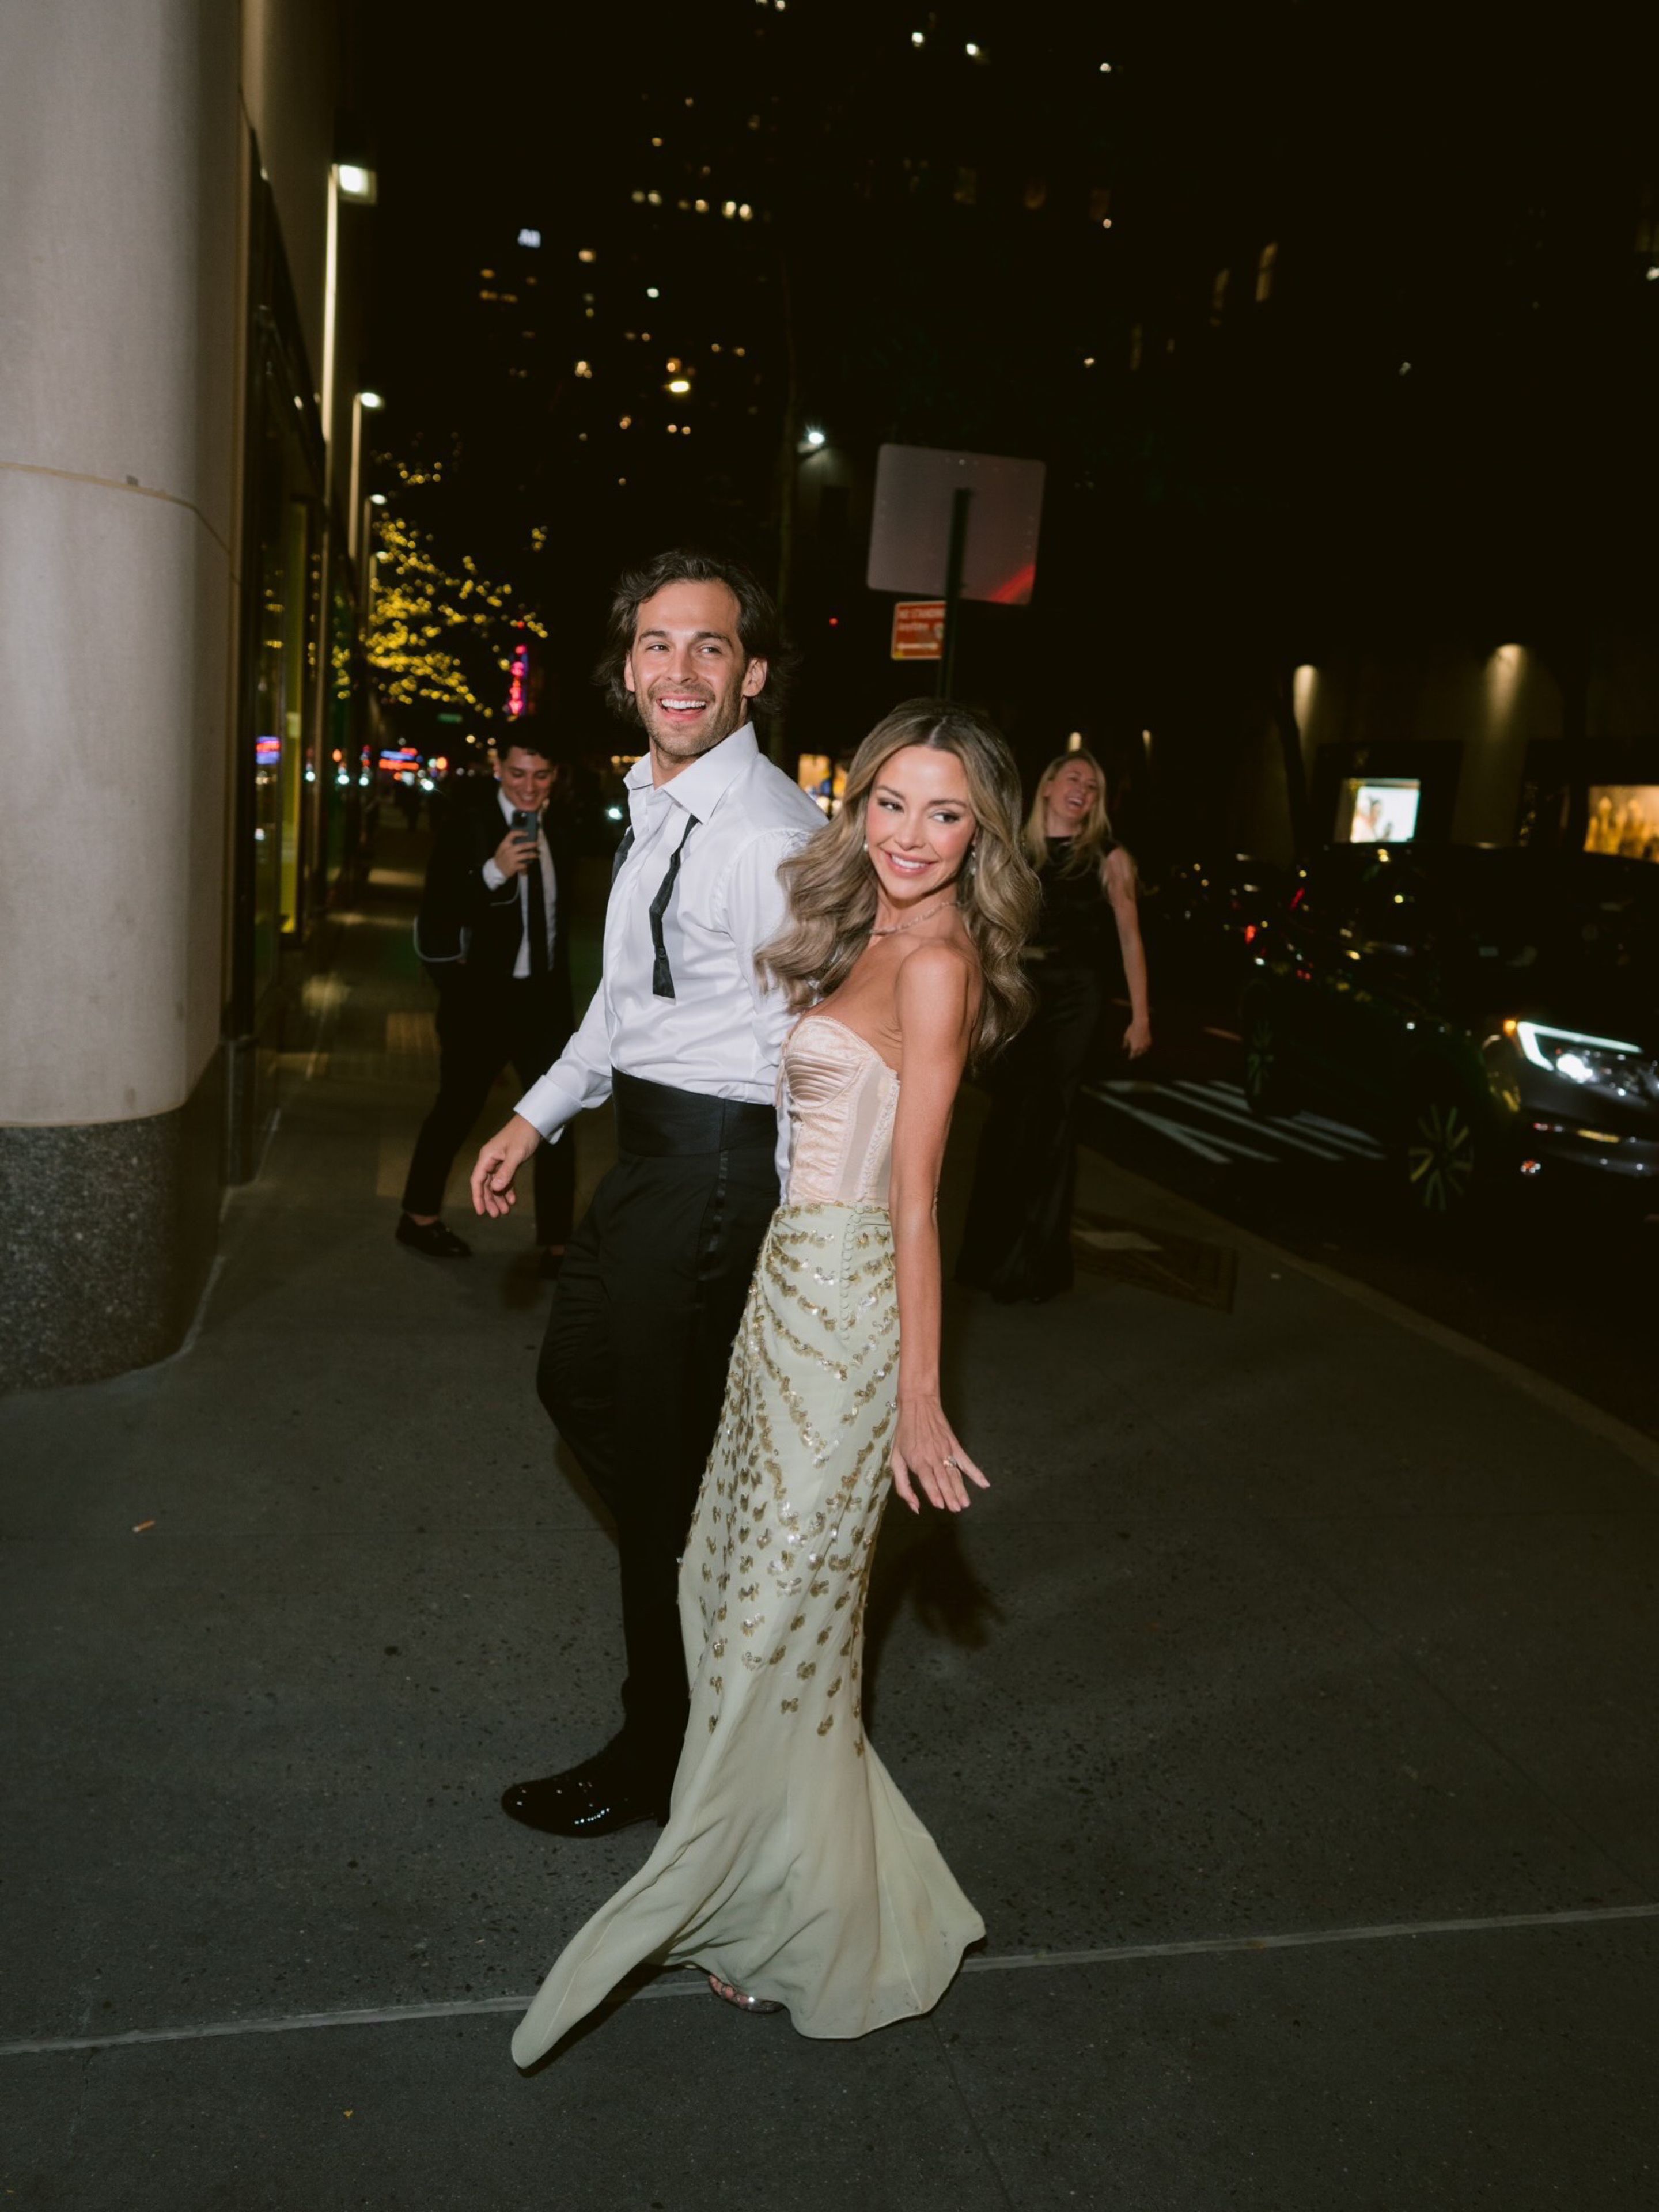 Bridget Bahl and Mike Chiodo wanted a New York wedding. A very New